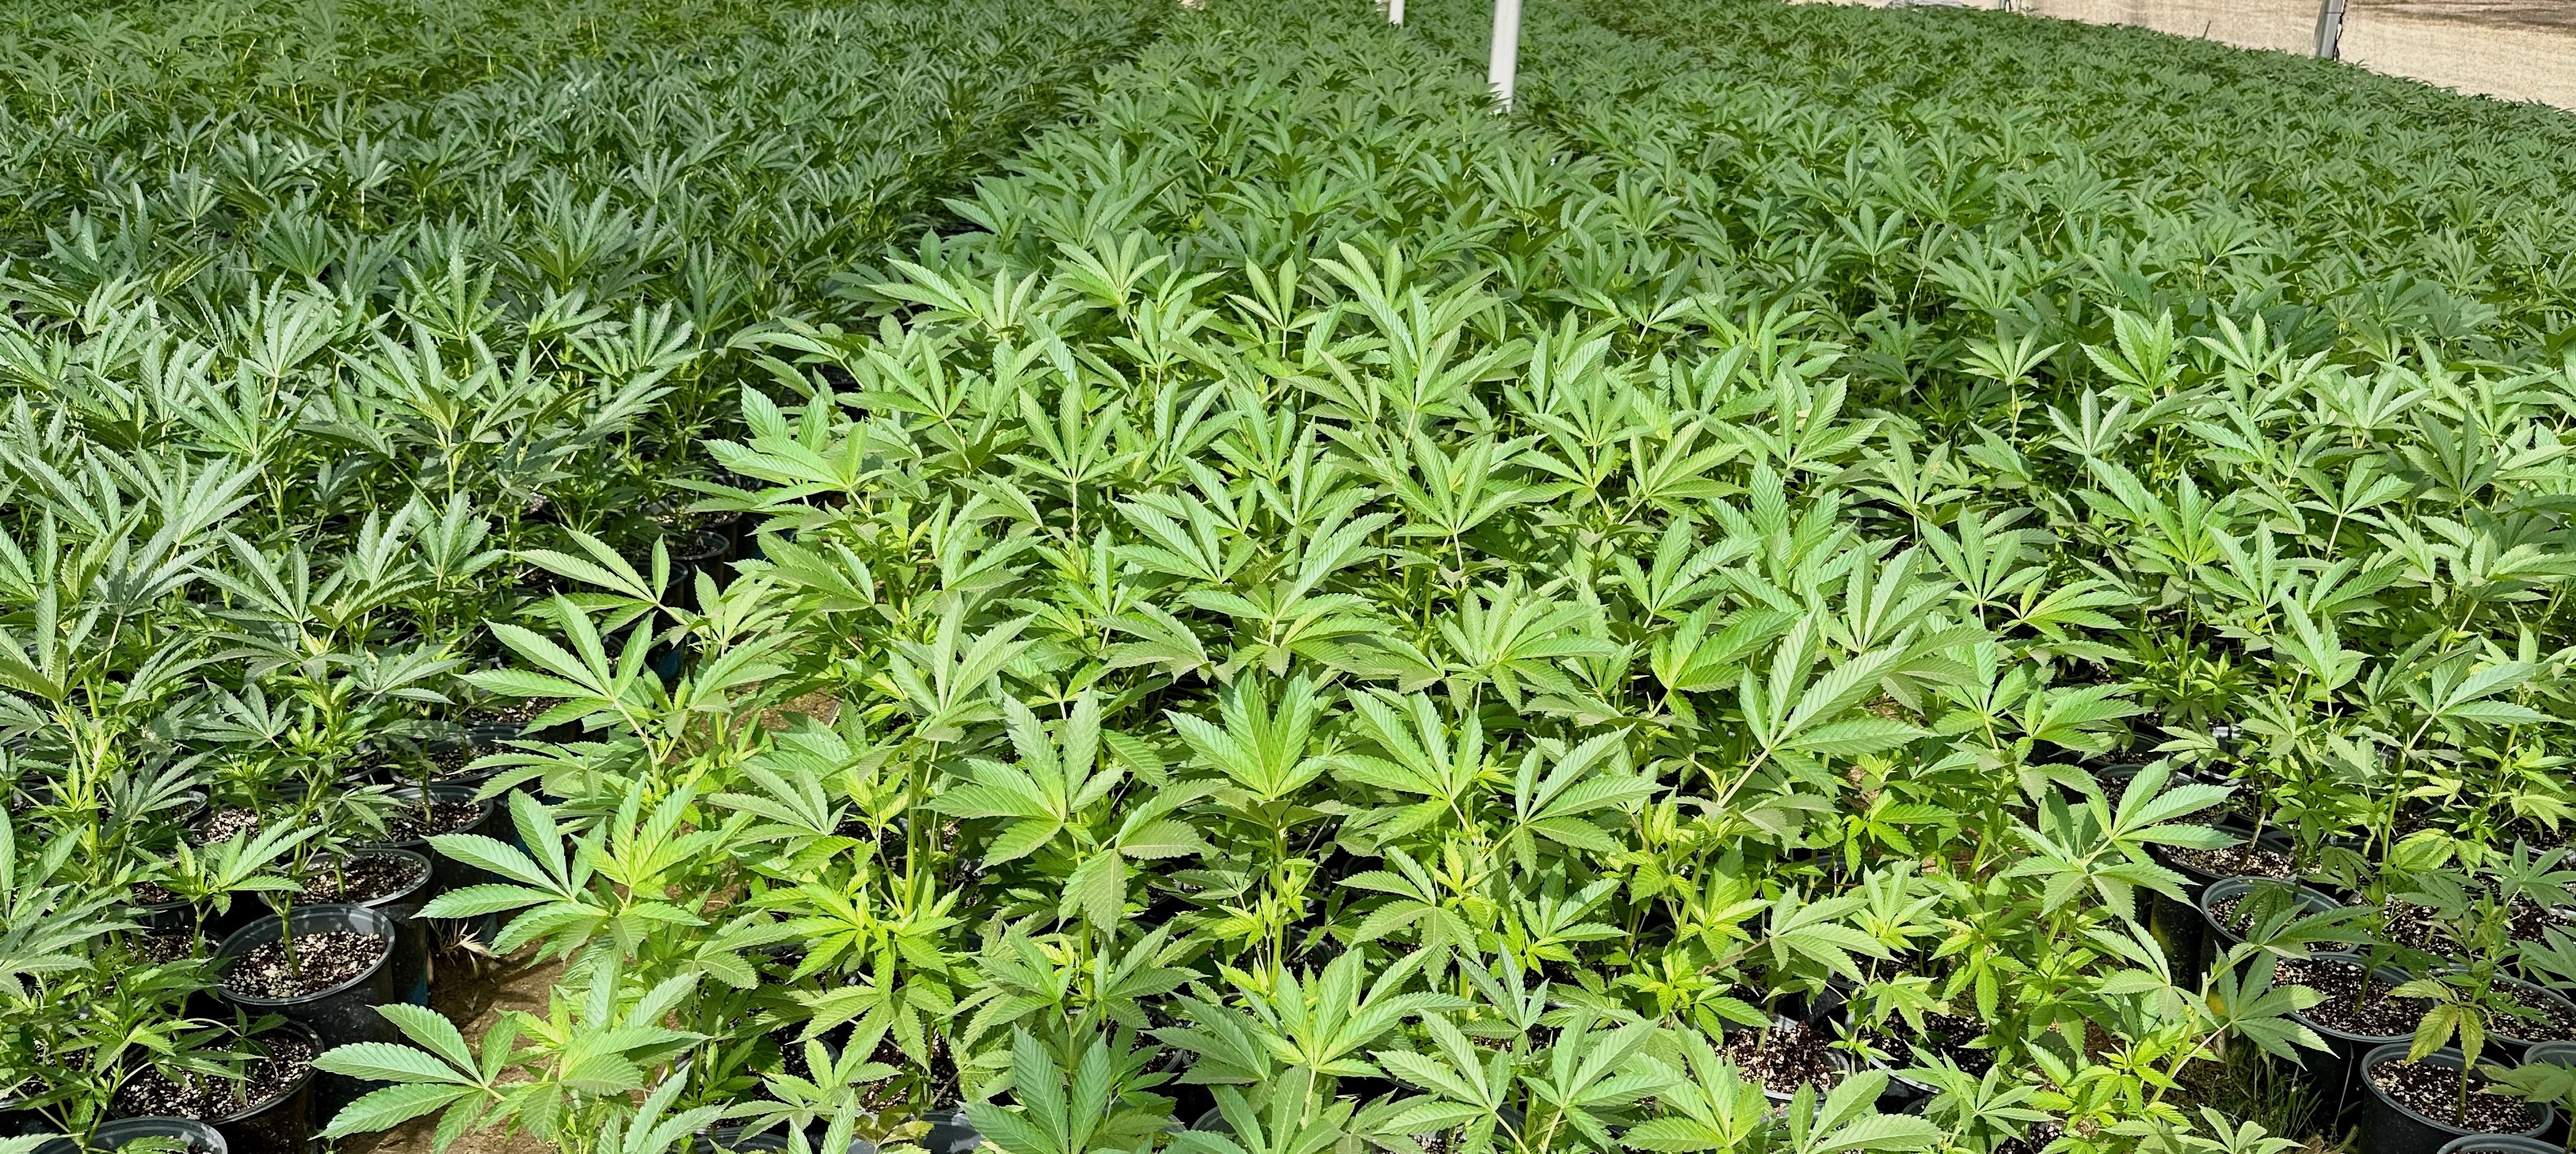 Cannabis plants Click to view article, Cannabis Business Tax Rate to be Reduced to 6% of Gross Receipts on July 1, 2023